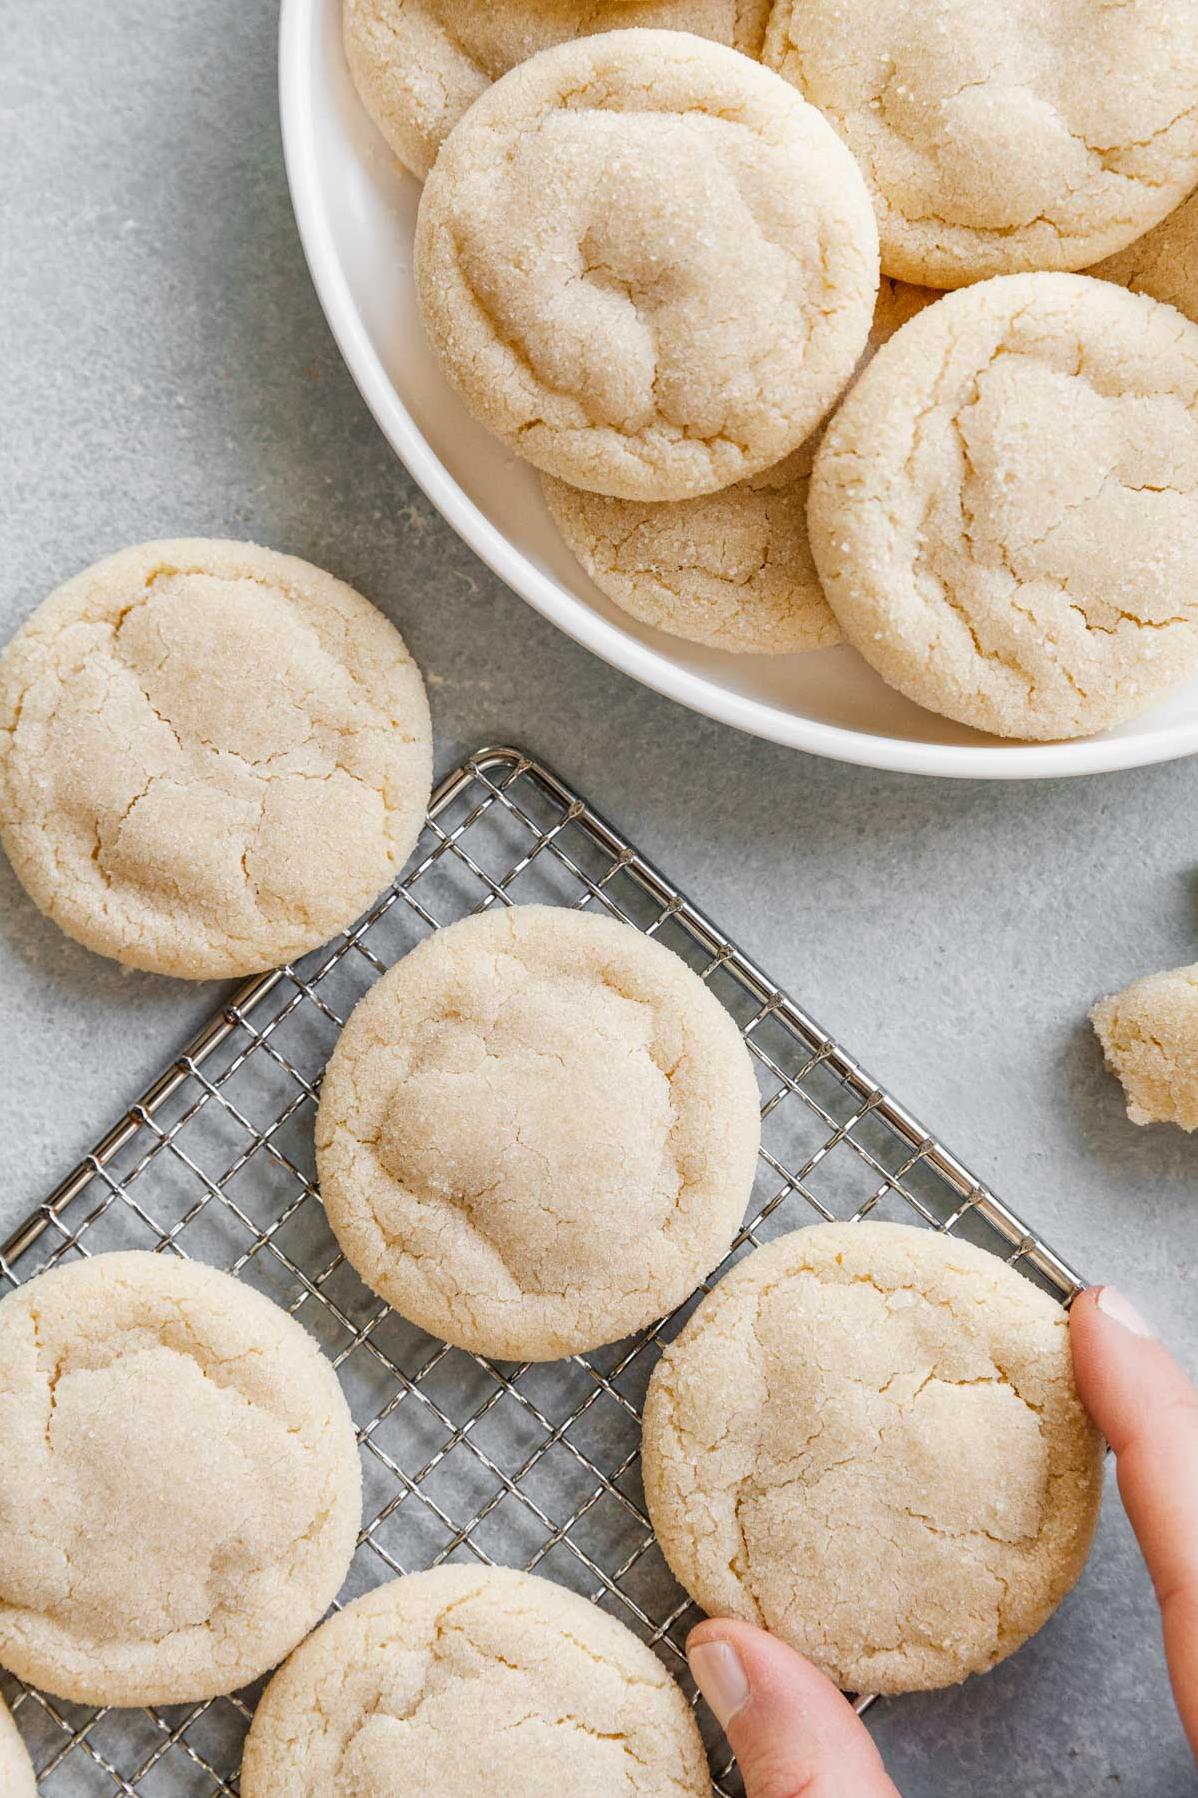  These sugar cookies are perfect for a dairy-free diet!